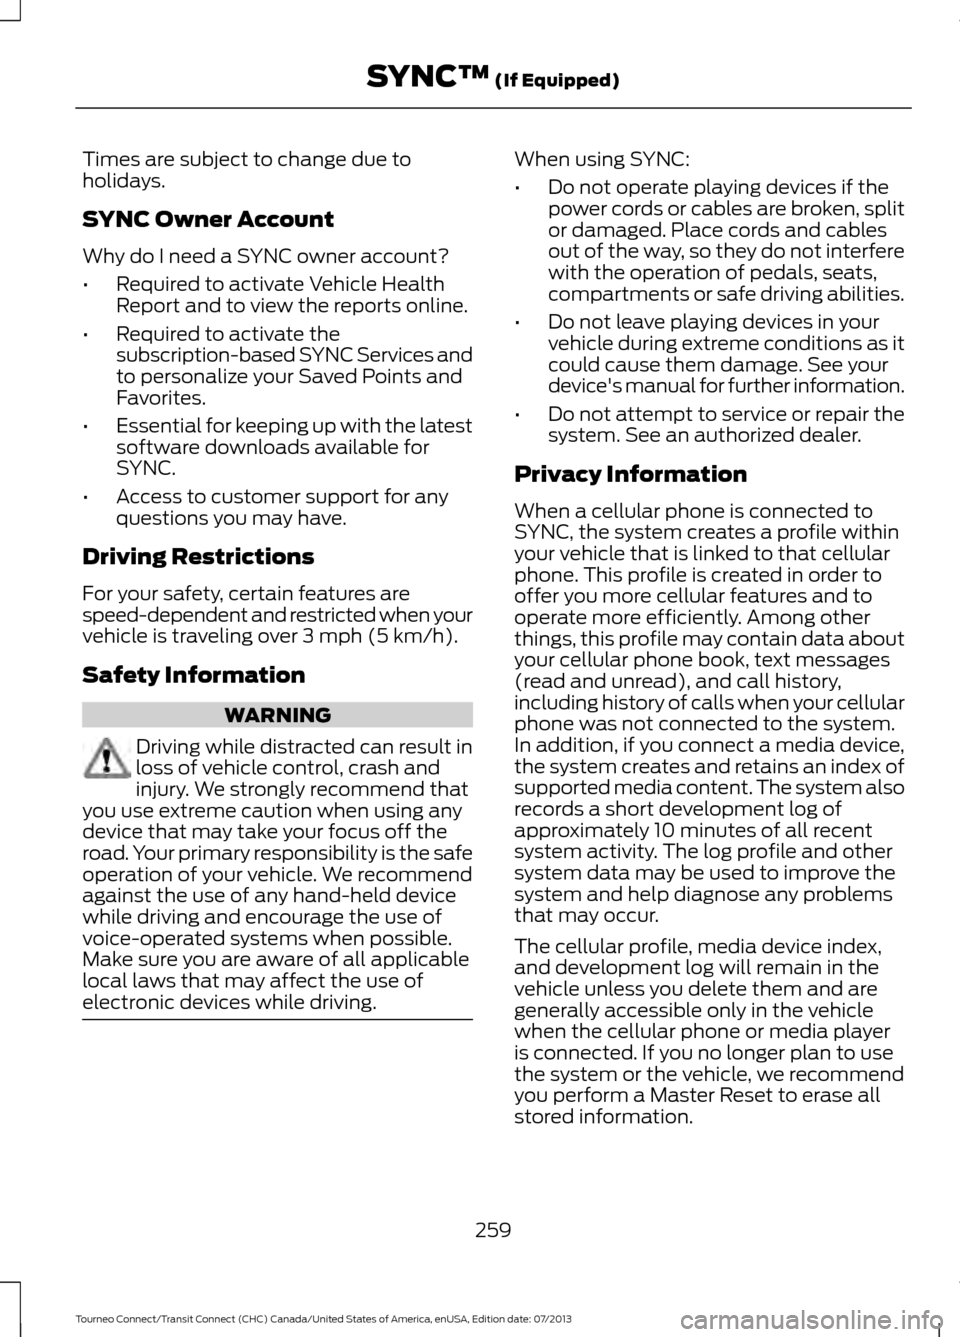 FORD TRANSIT CONNECT 2014 2.G Owners Manual Times are subject to change due to
holidays.
SYNC Owner Account
Why do I need a SYNC owner account?
•
Required to activate Vehicle Health
Report and to view the reports online.
• Required to activ